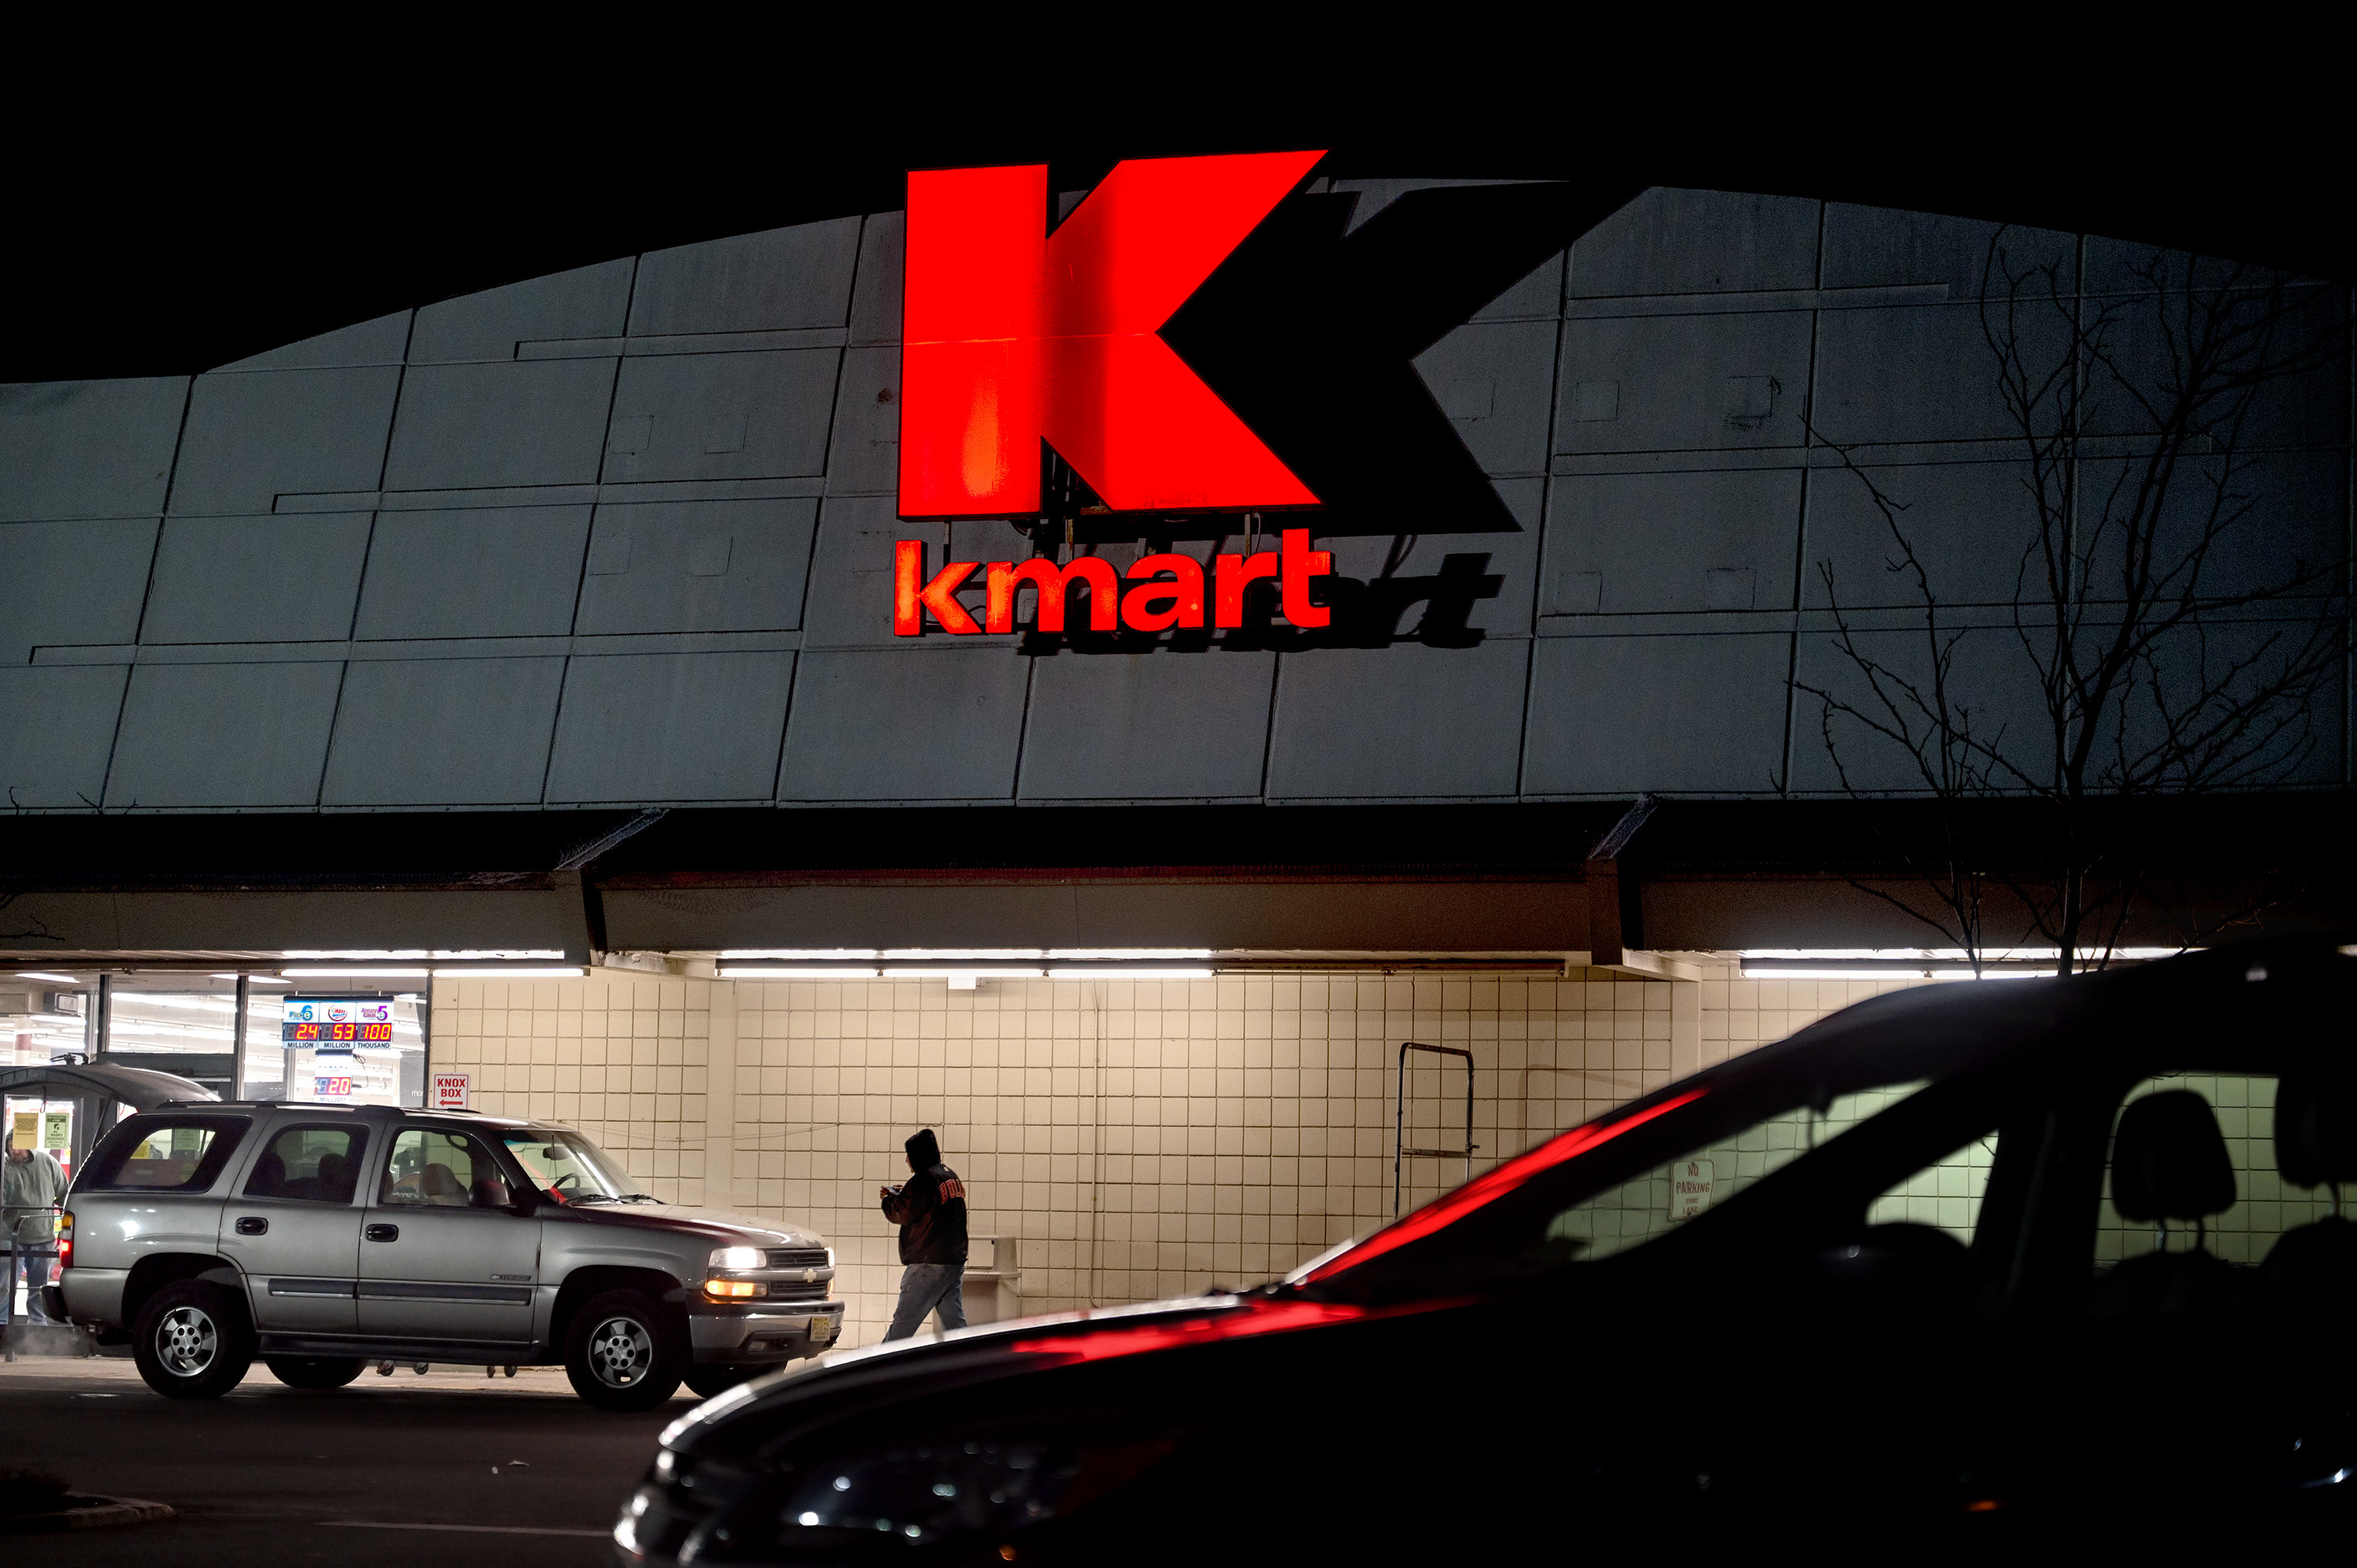 Kmart 81-01 Northern Blvd, Queens, NY 11372 - Last Updated March